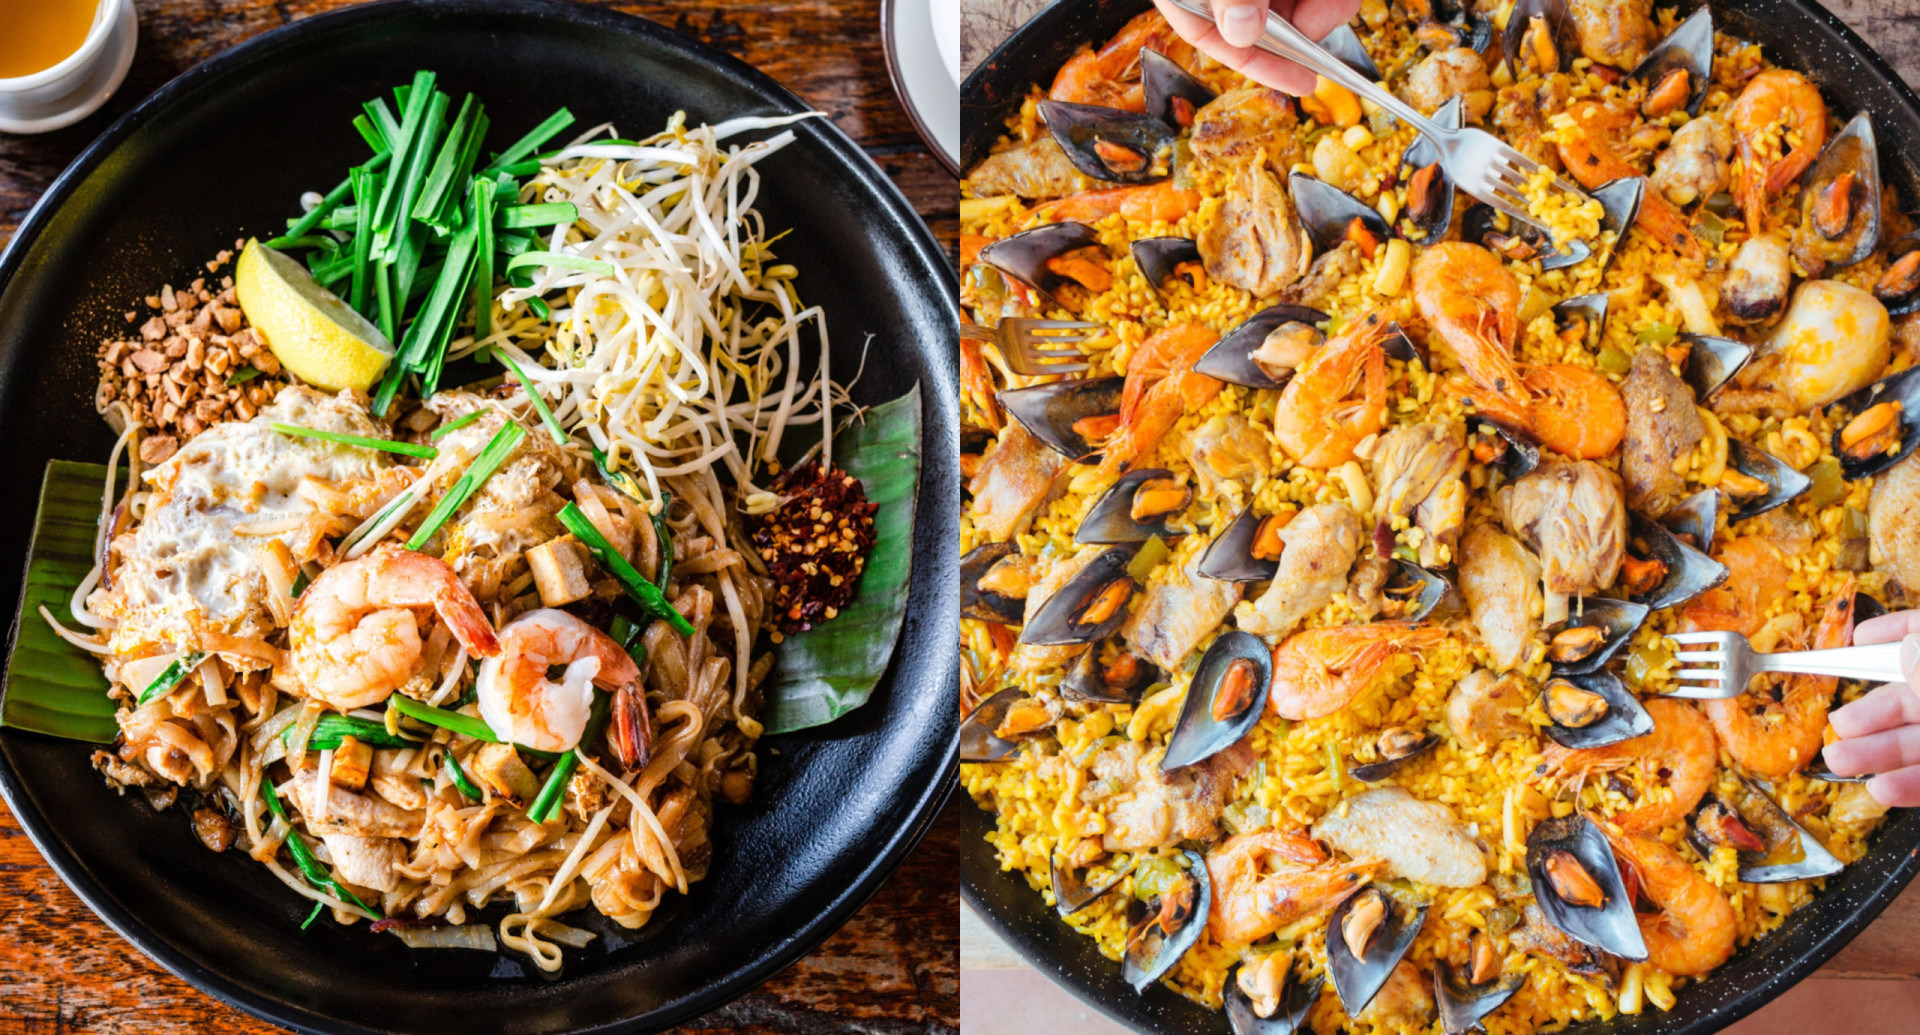 The world's most popular dishes